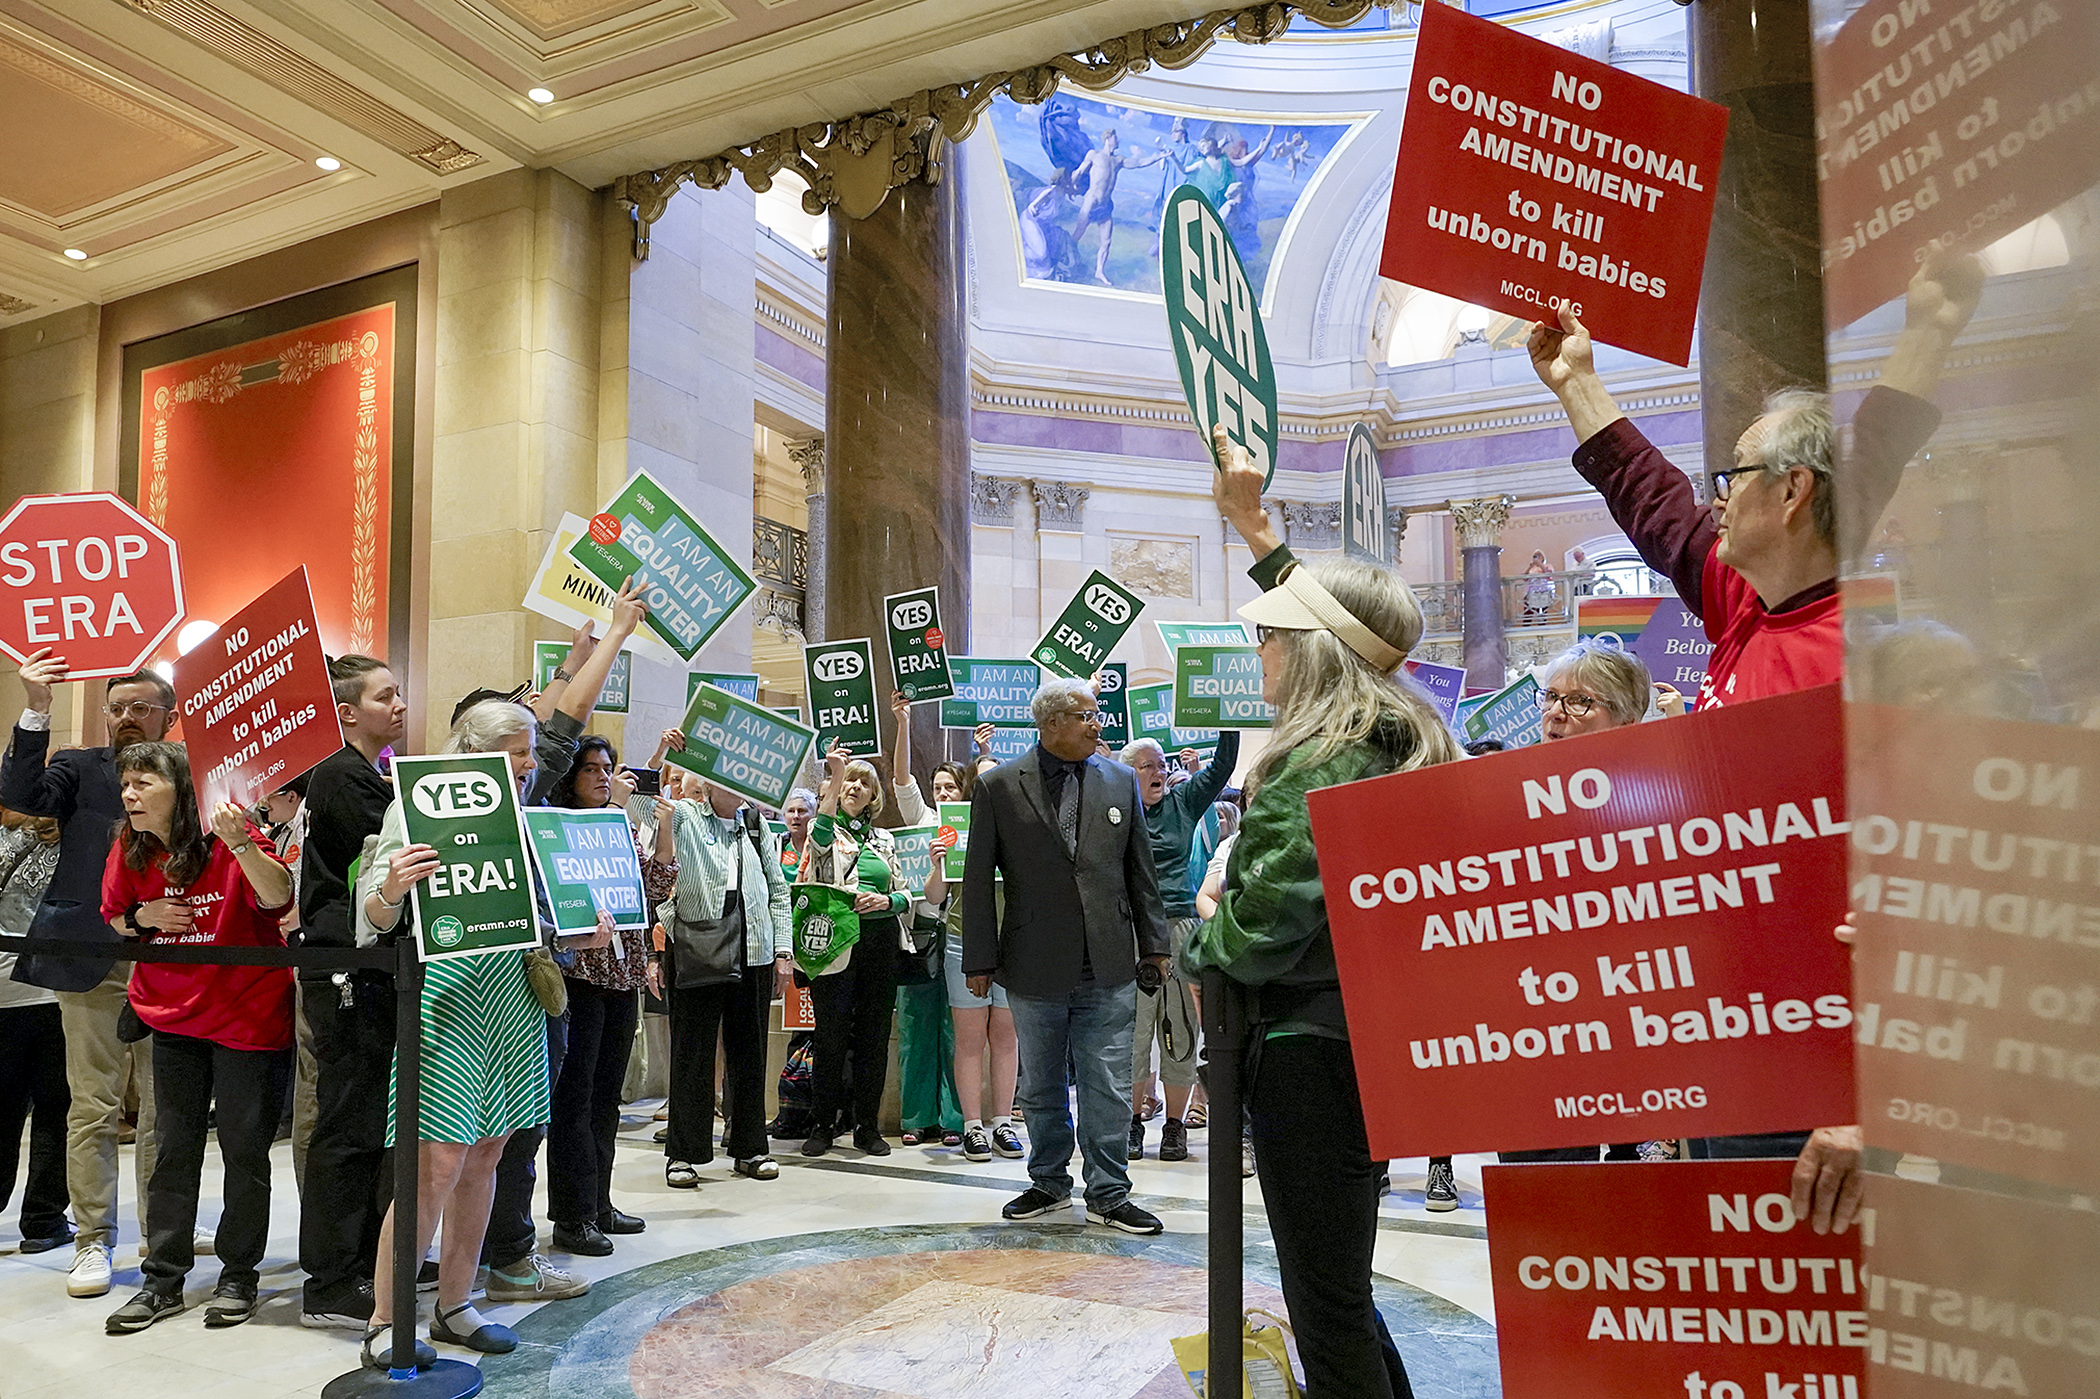 Proponents and opponents of a proposed equal rights constitutional amendment rally Monday outside the House Chamber. An expected vote Monday on the measure did not occur. (Photo by Michele Jokinen)
